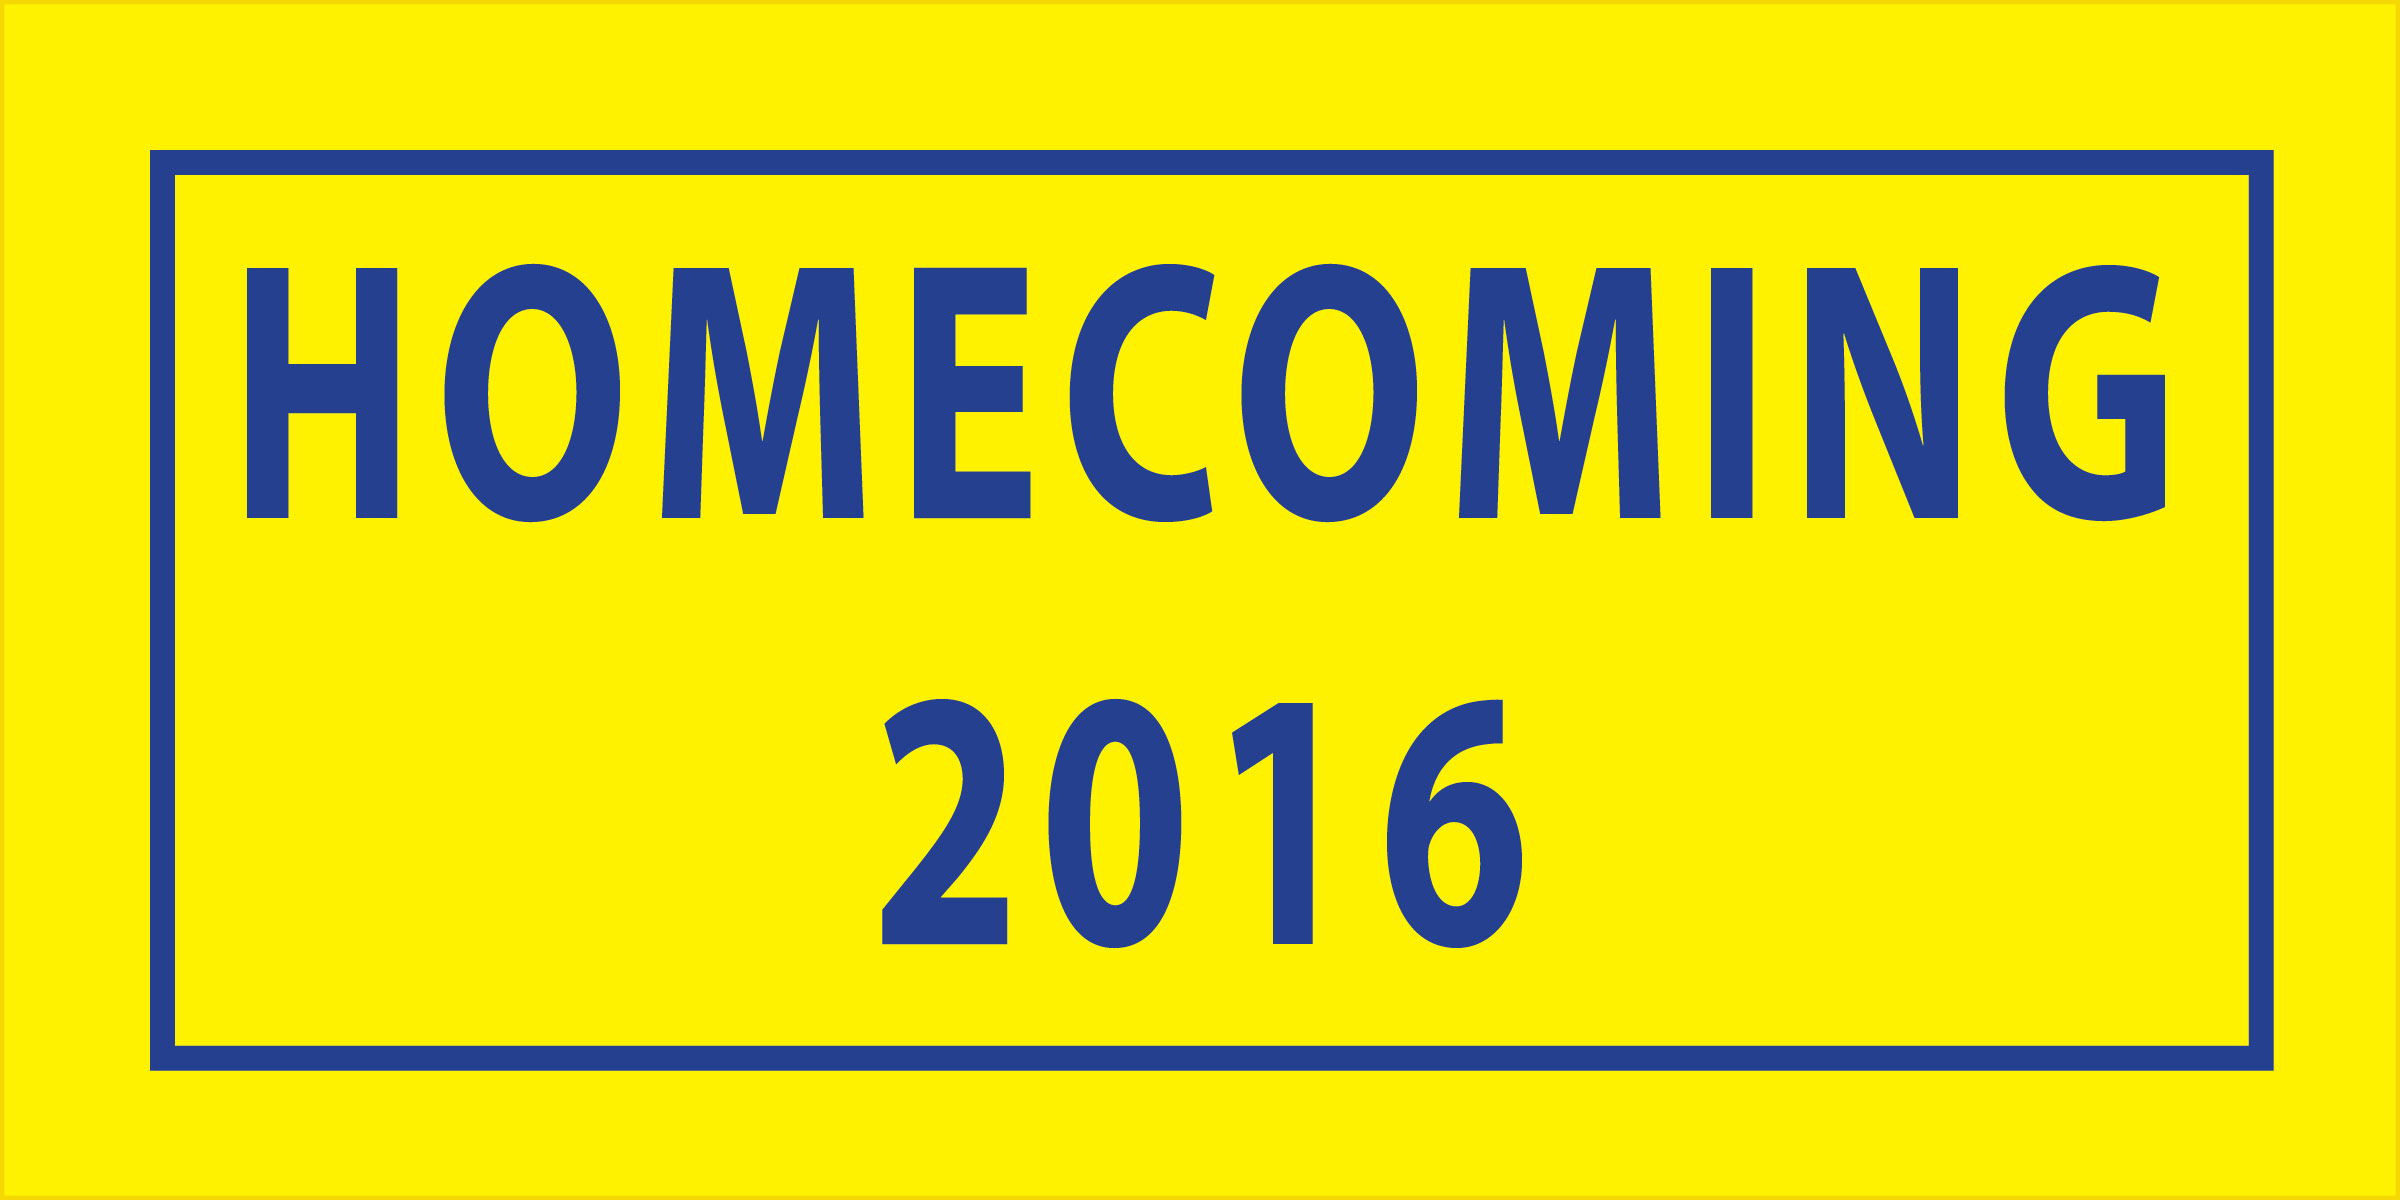 Graphic showing Homecoming 2016